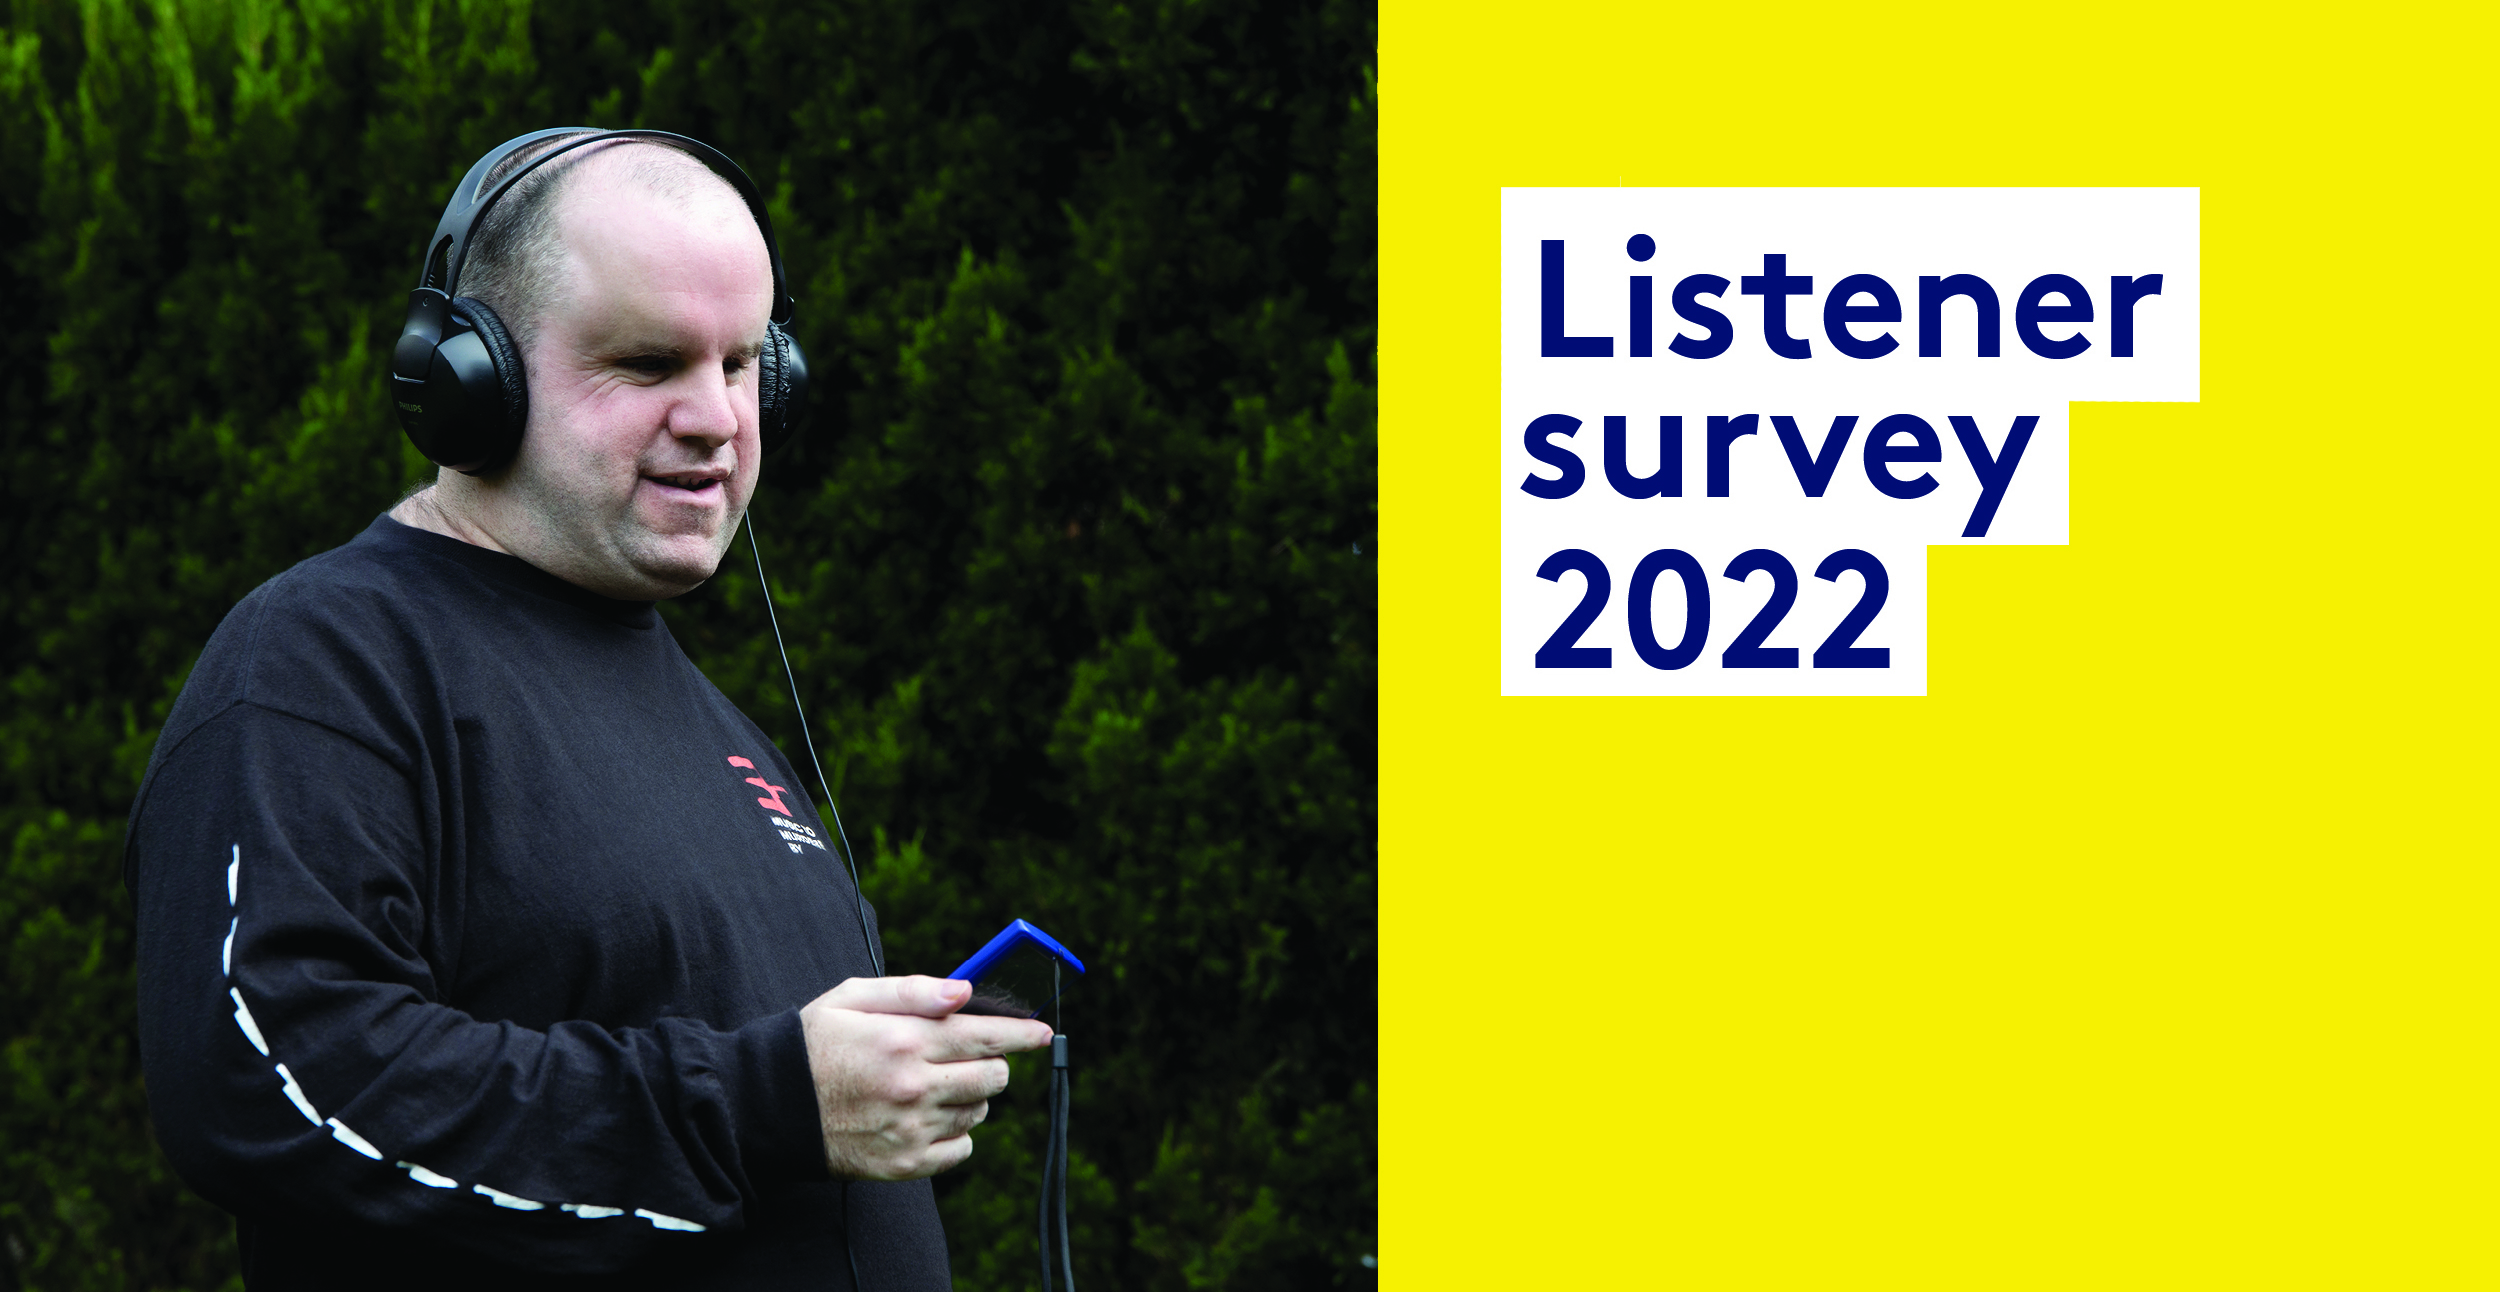 Listener survey 2022. Man wearing headphones and listening from a portable device